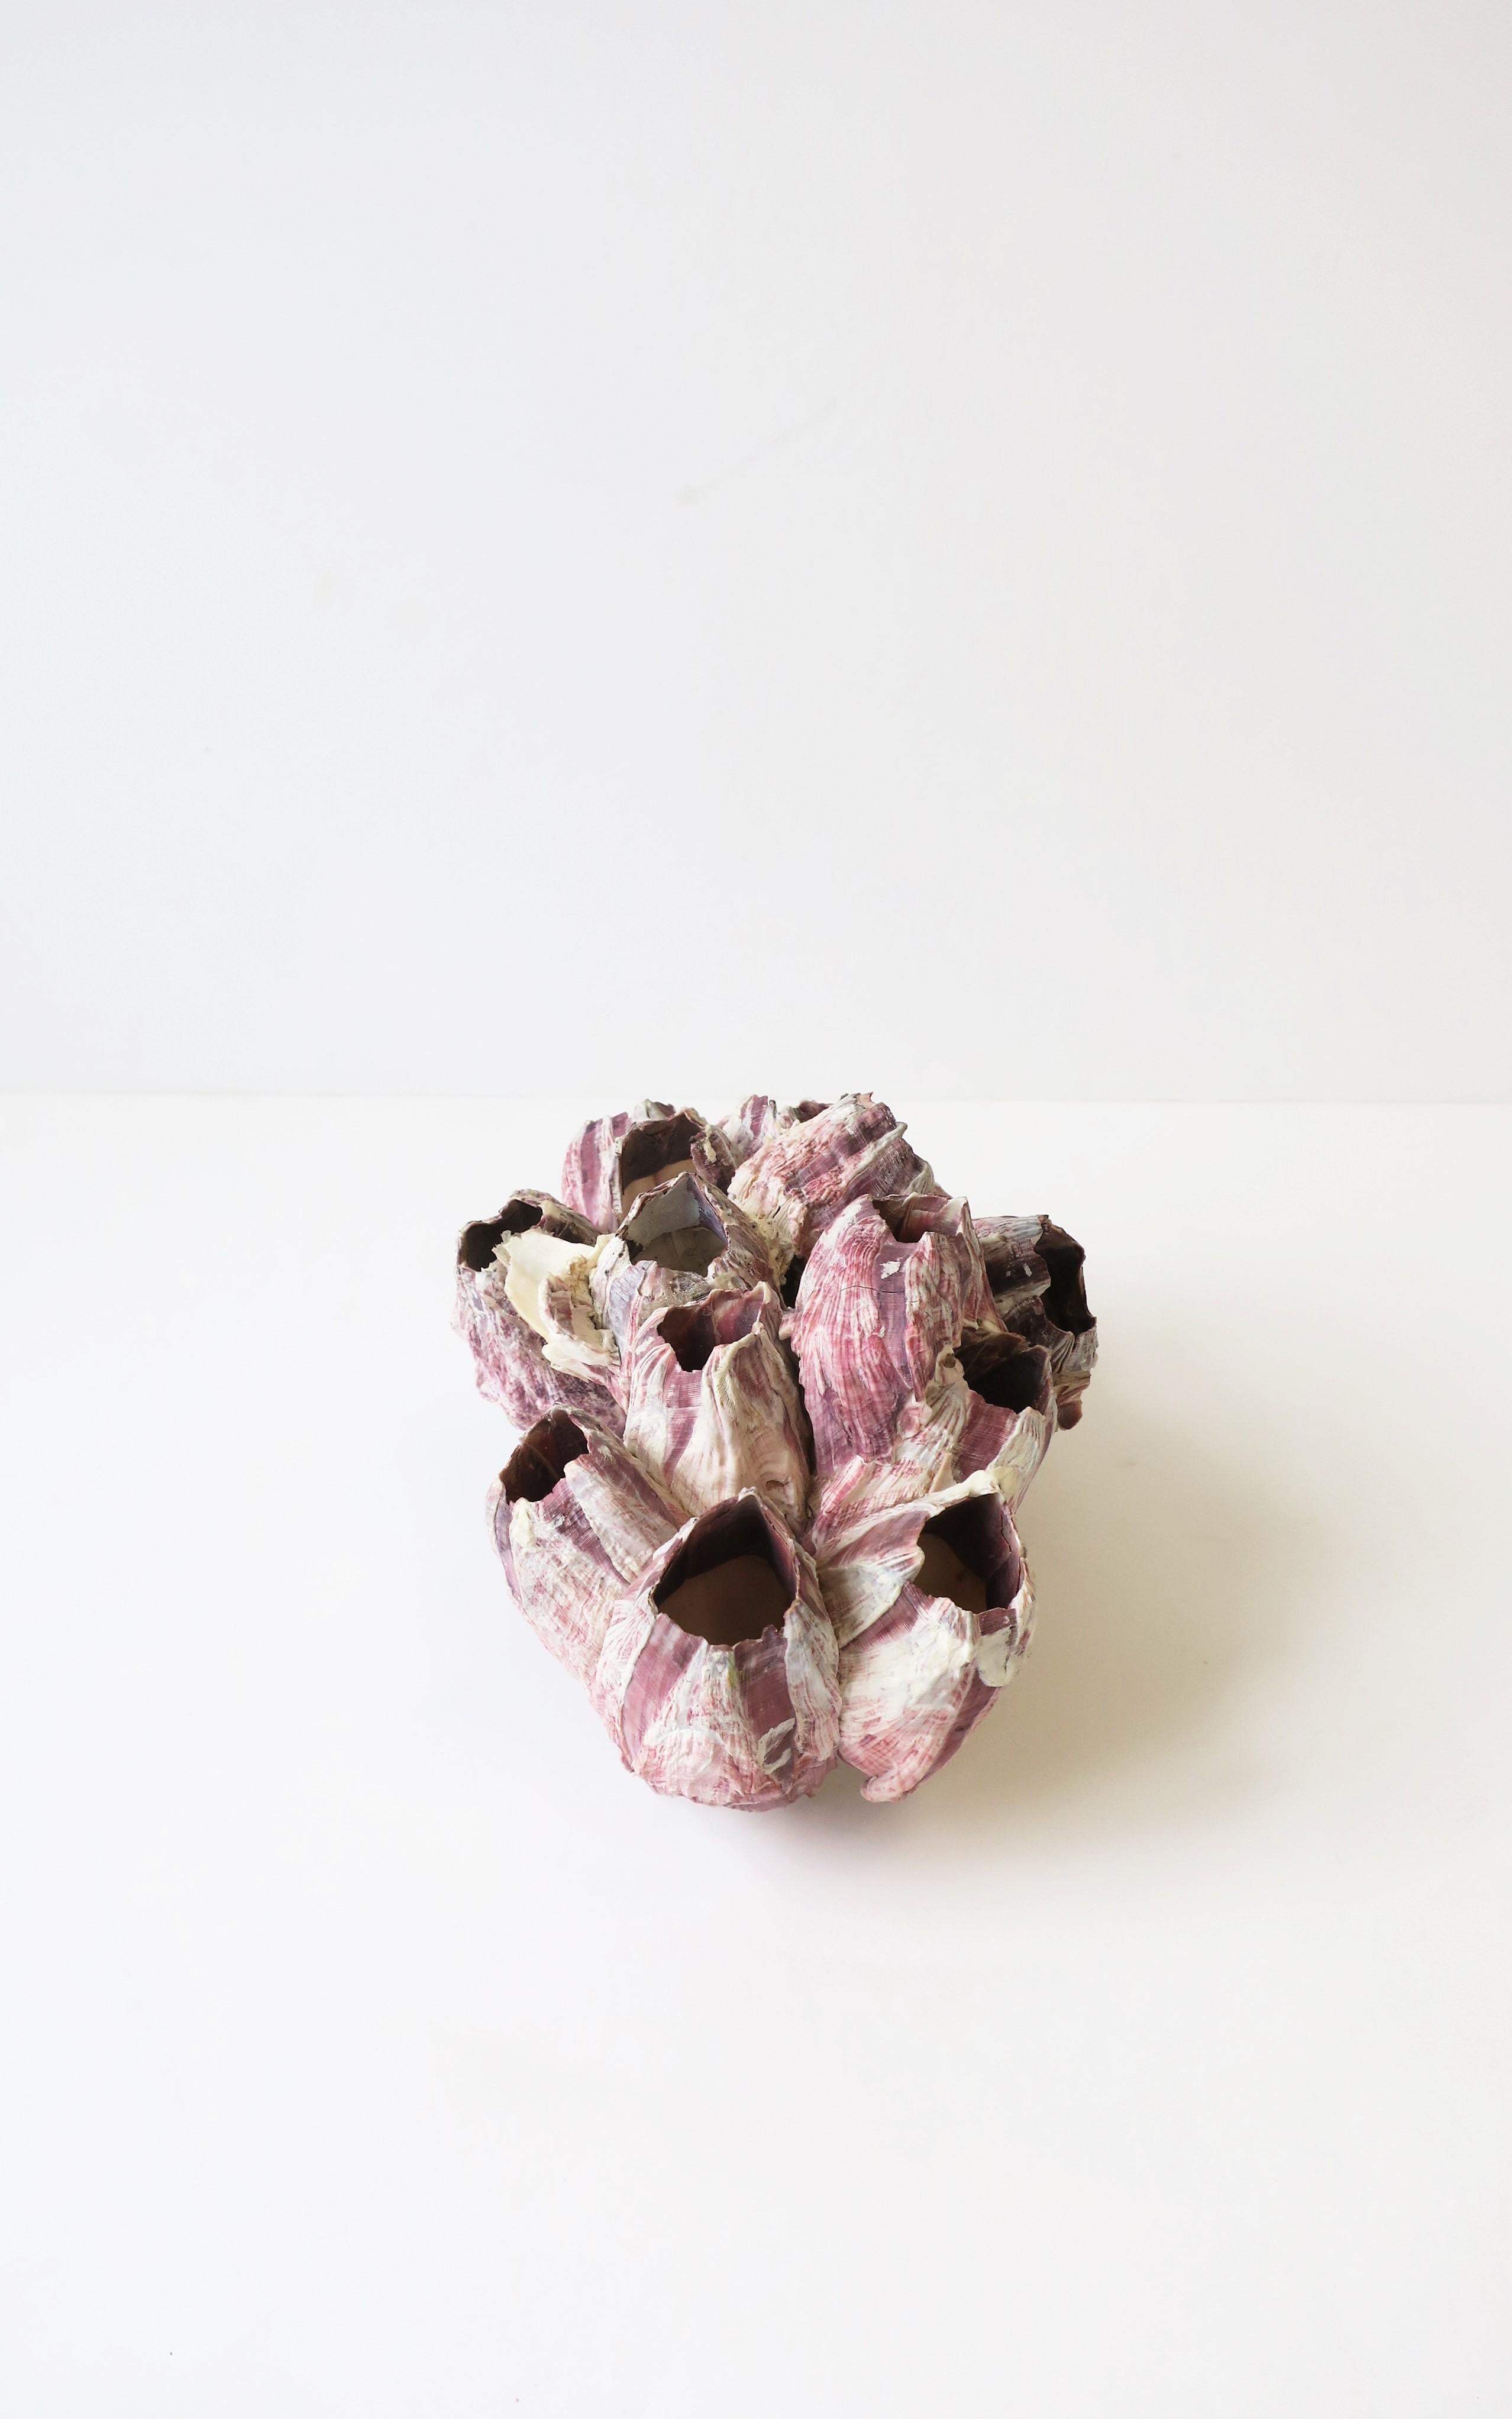 Barnacle Sea Shell Natural White and Purple Specimen Piece 2